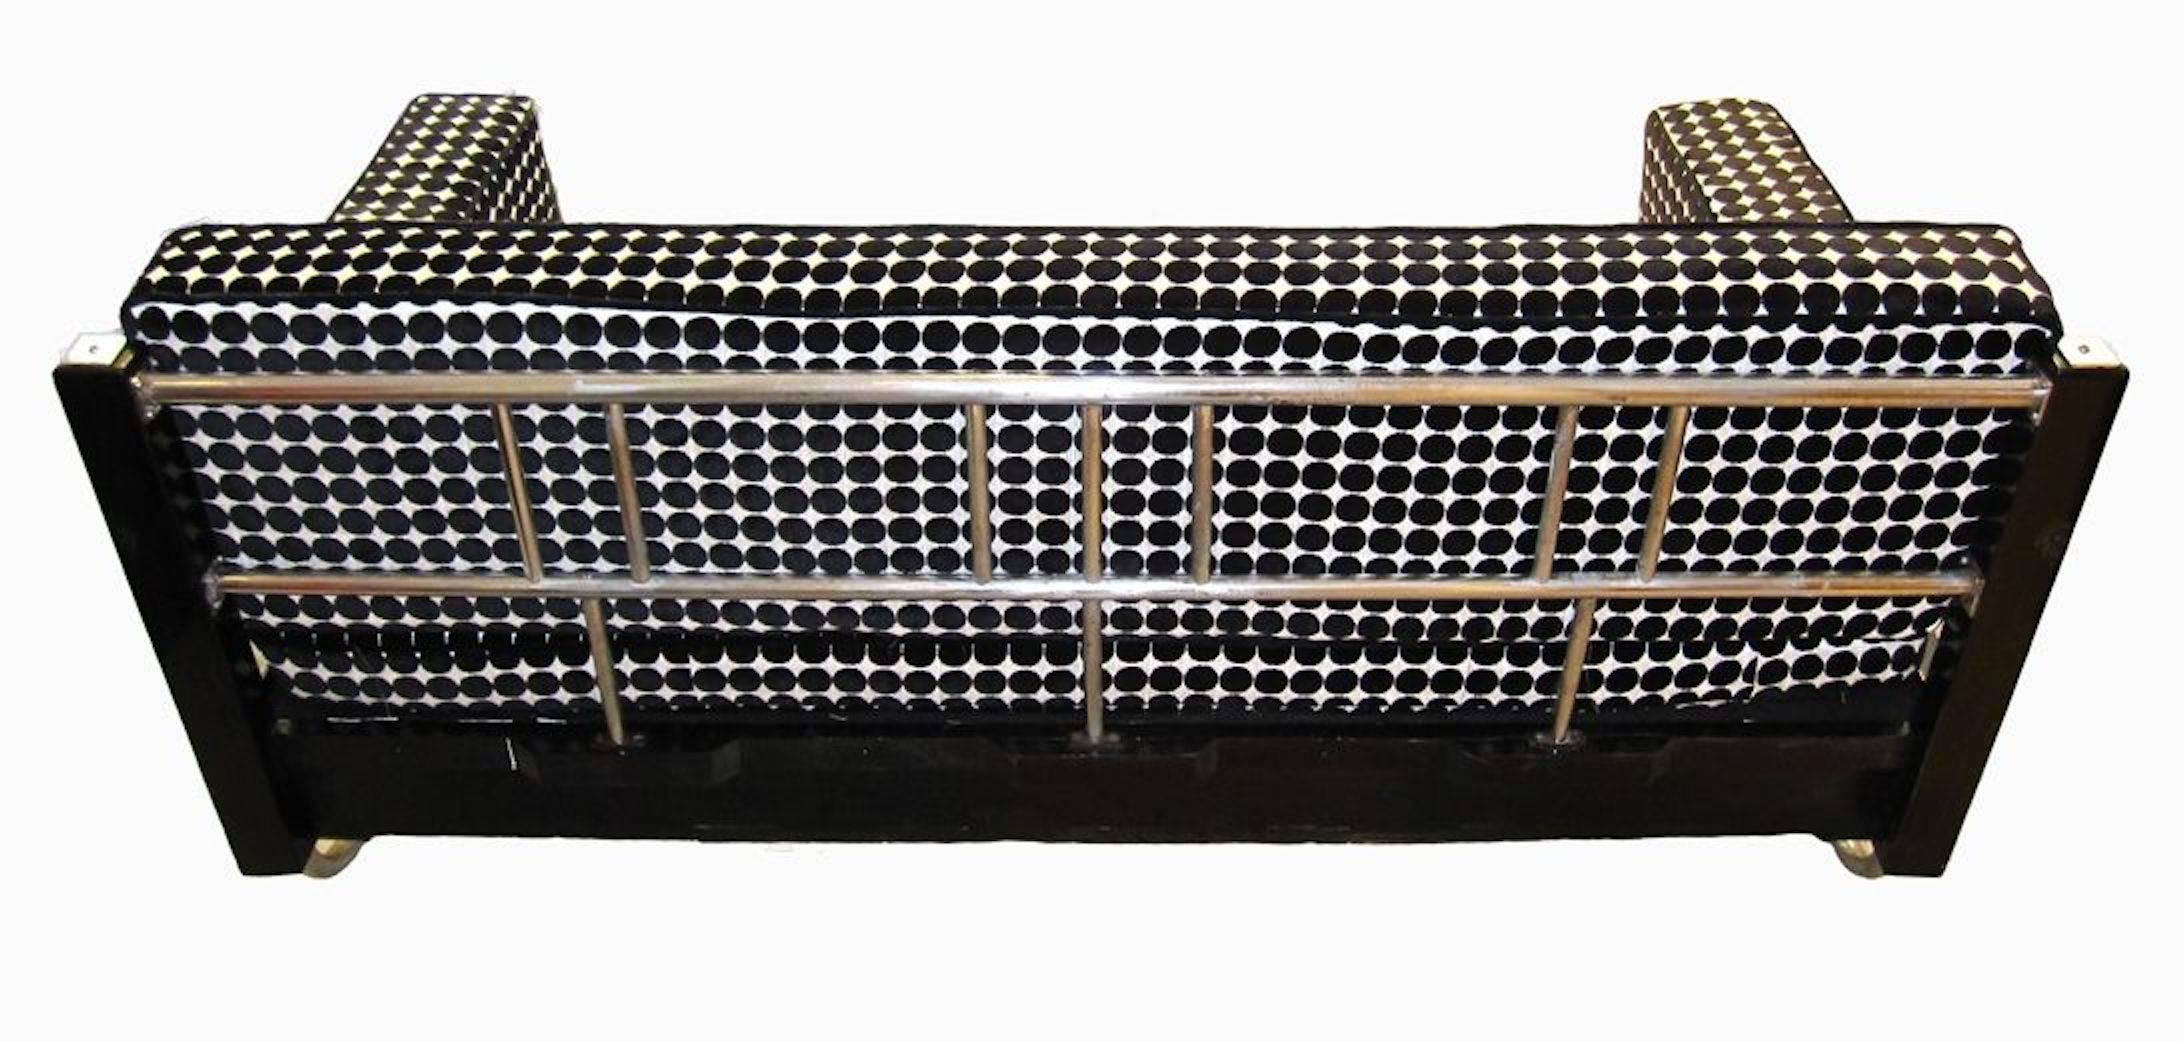 Mid-20th Century Bauhaus Sofa, Chromed Steeltubes and Black Lacquer, Germany circa 1930